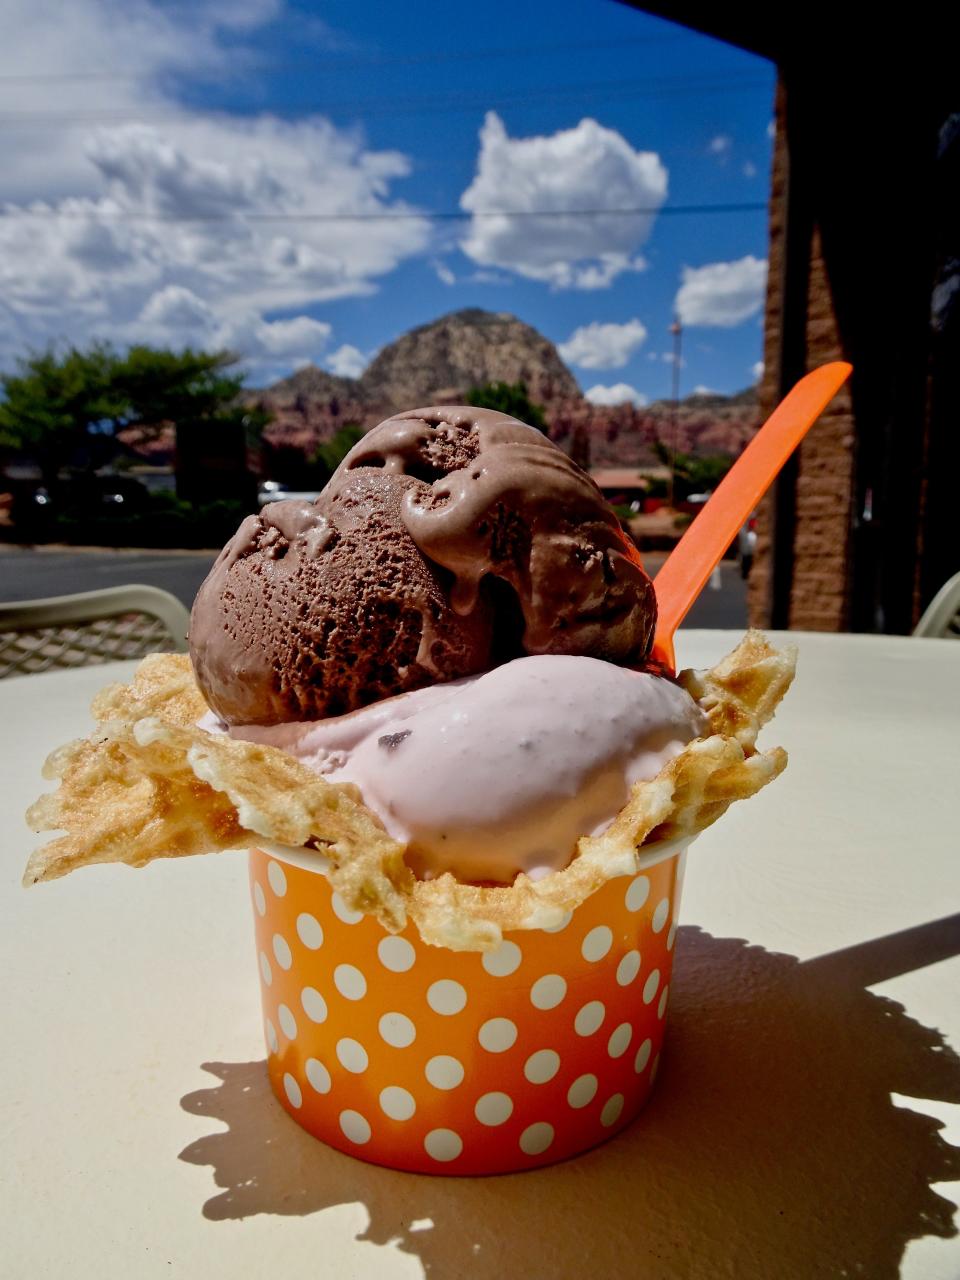 According to a study by angi.com, Texas' top ice cream flavor is Cookies and Cream.